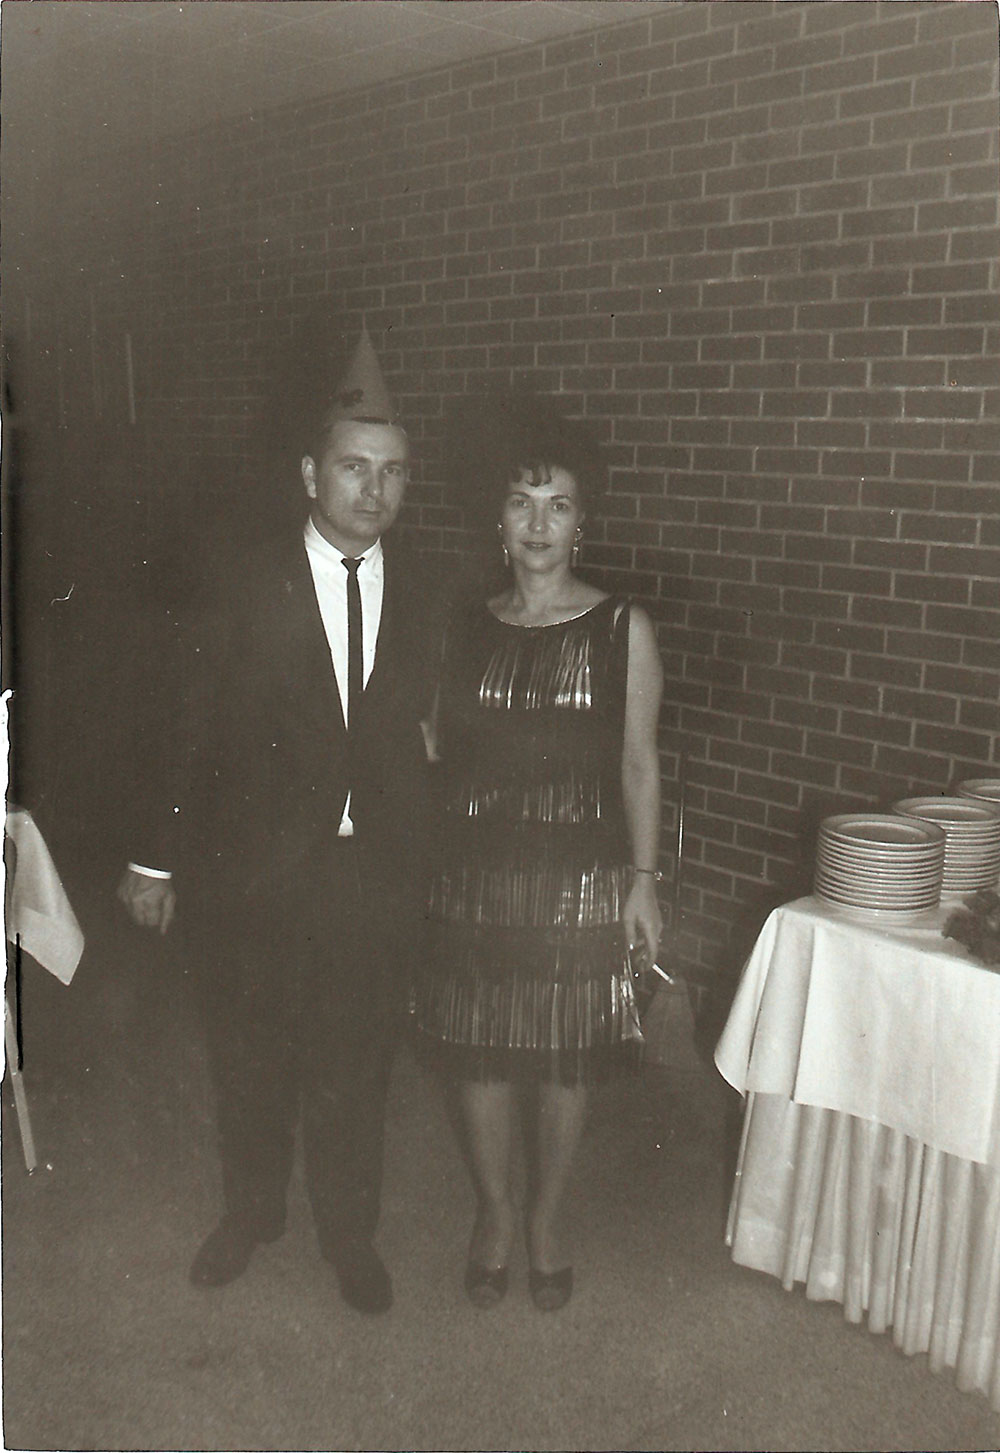 (FNB.2010.11.18) - Halloween Party, c. early 1960s